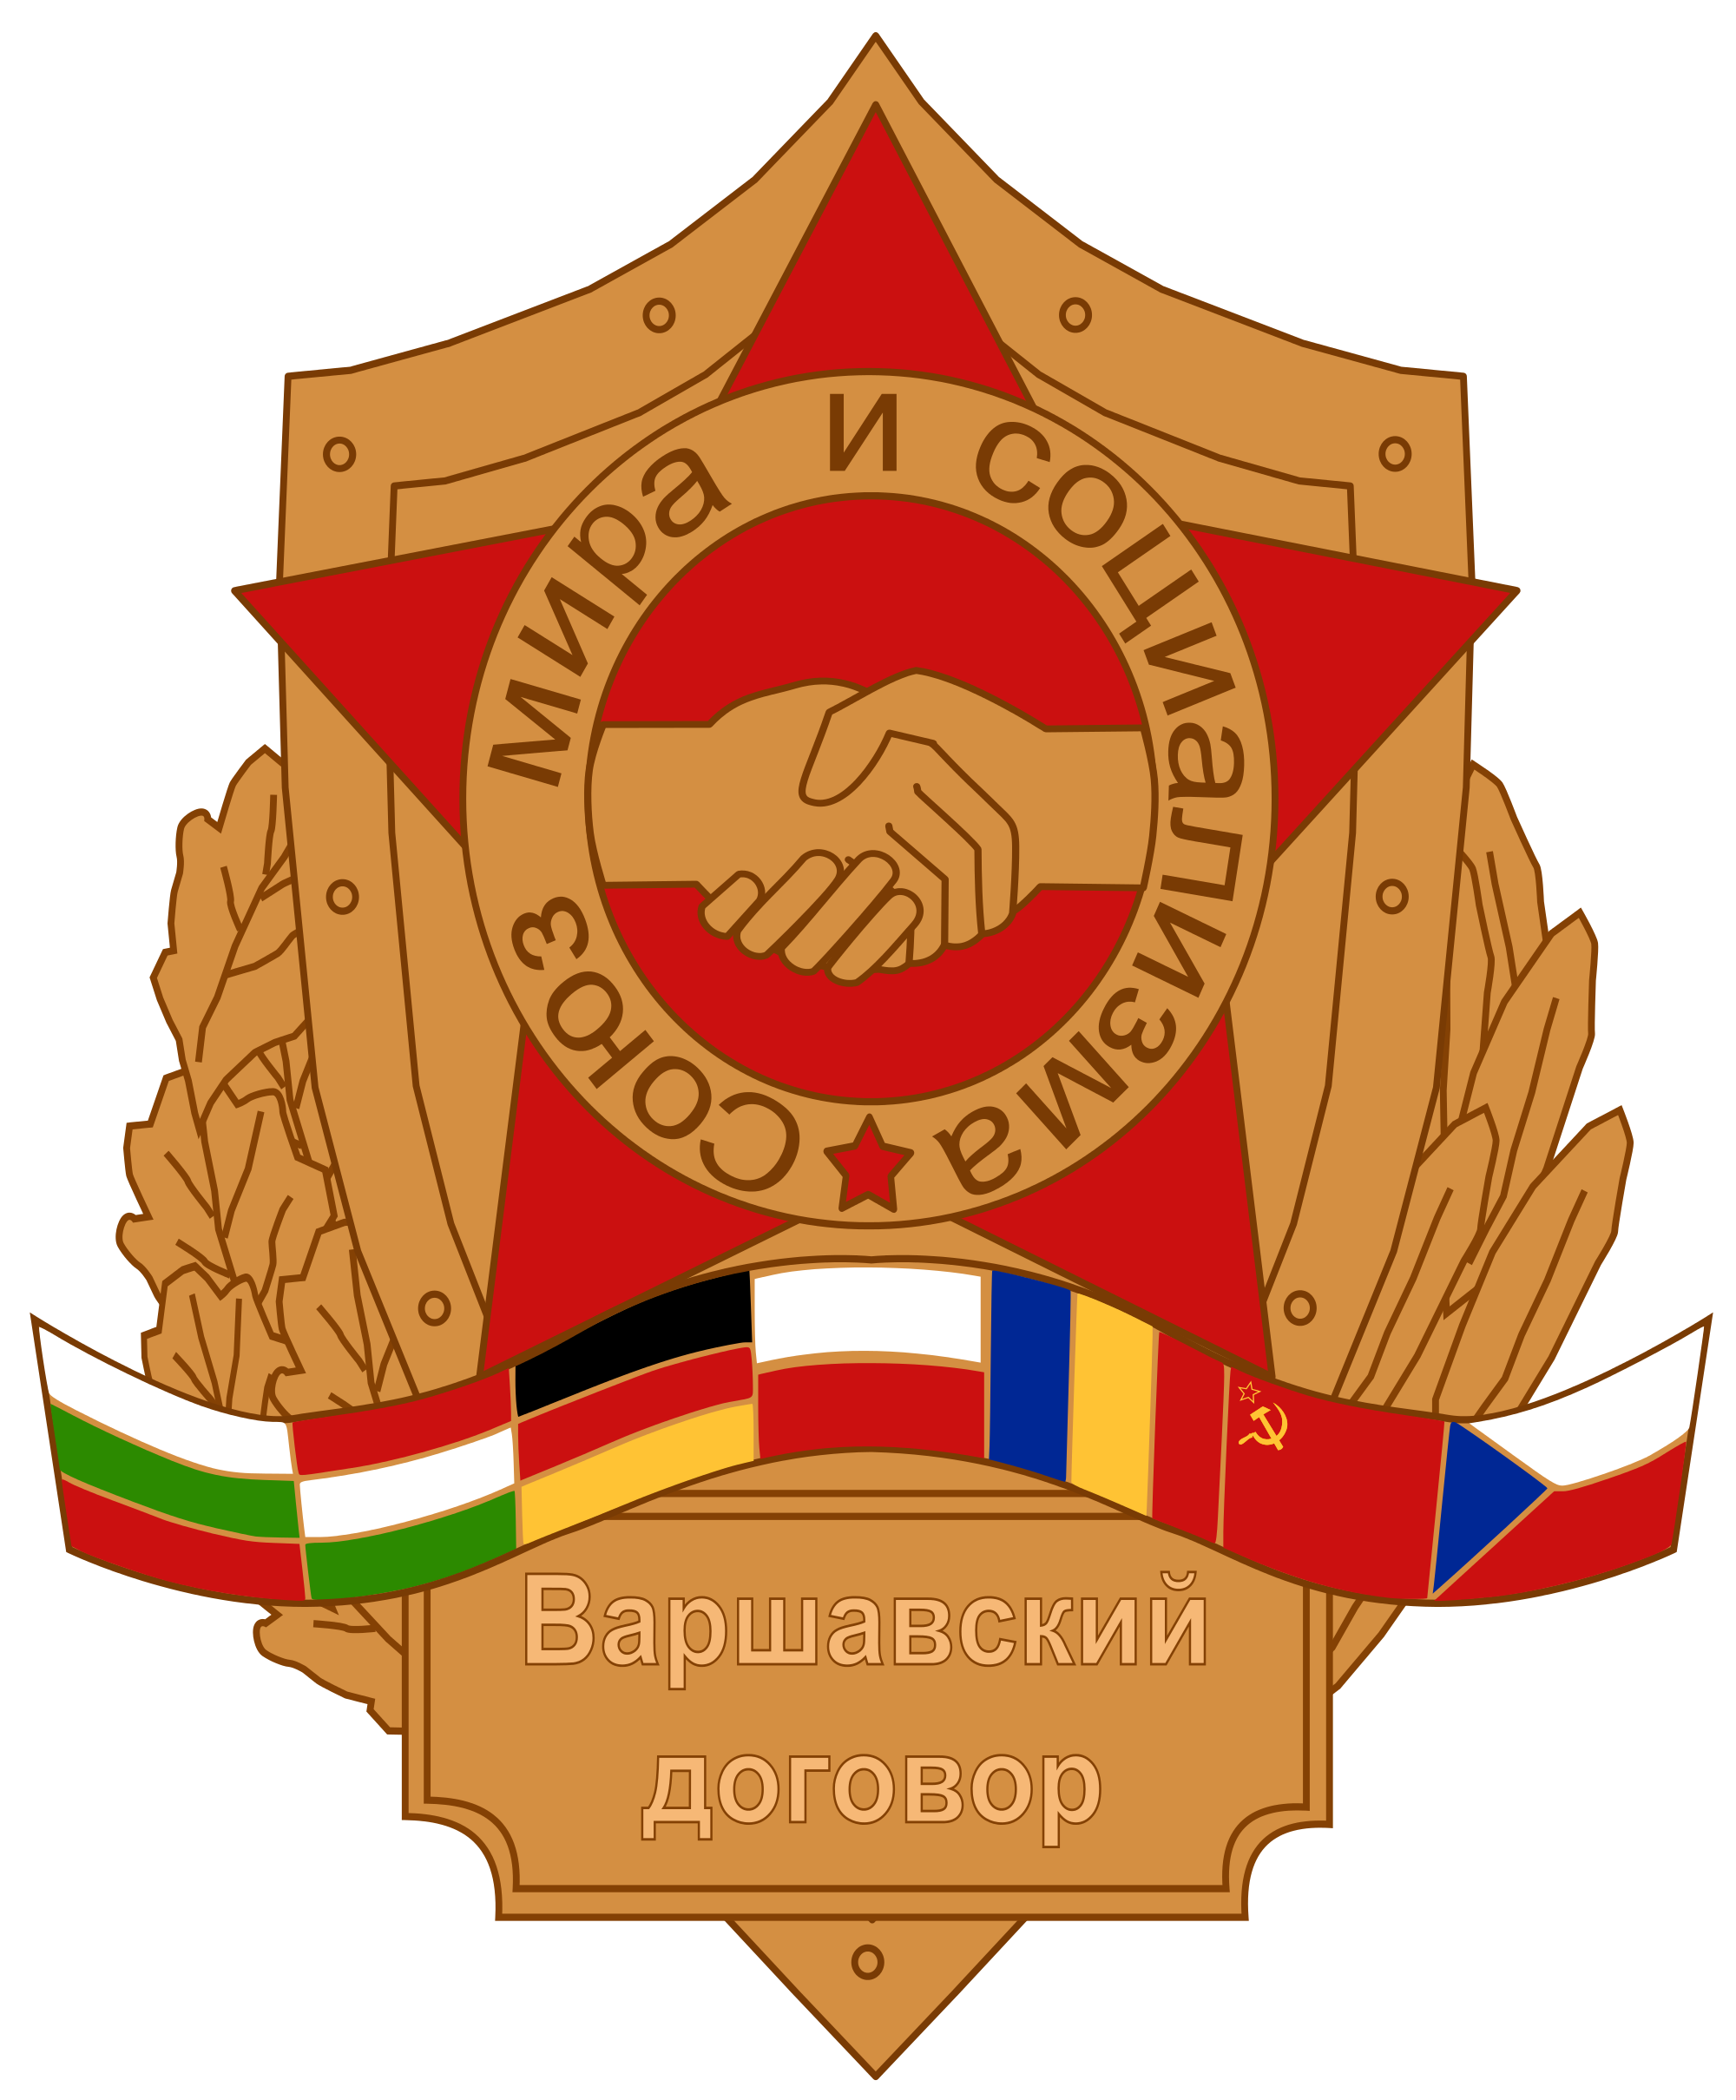 Image Warsaw Pact Flagpng Implausable Alternate History Wiki